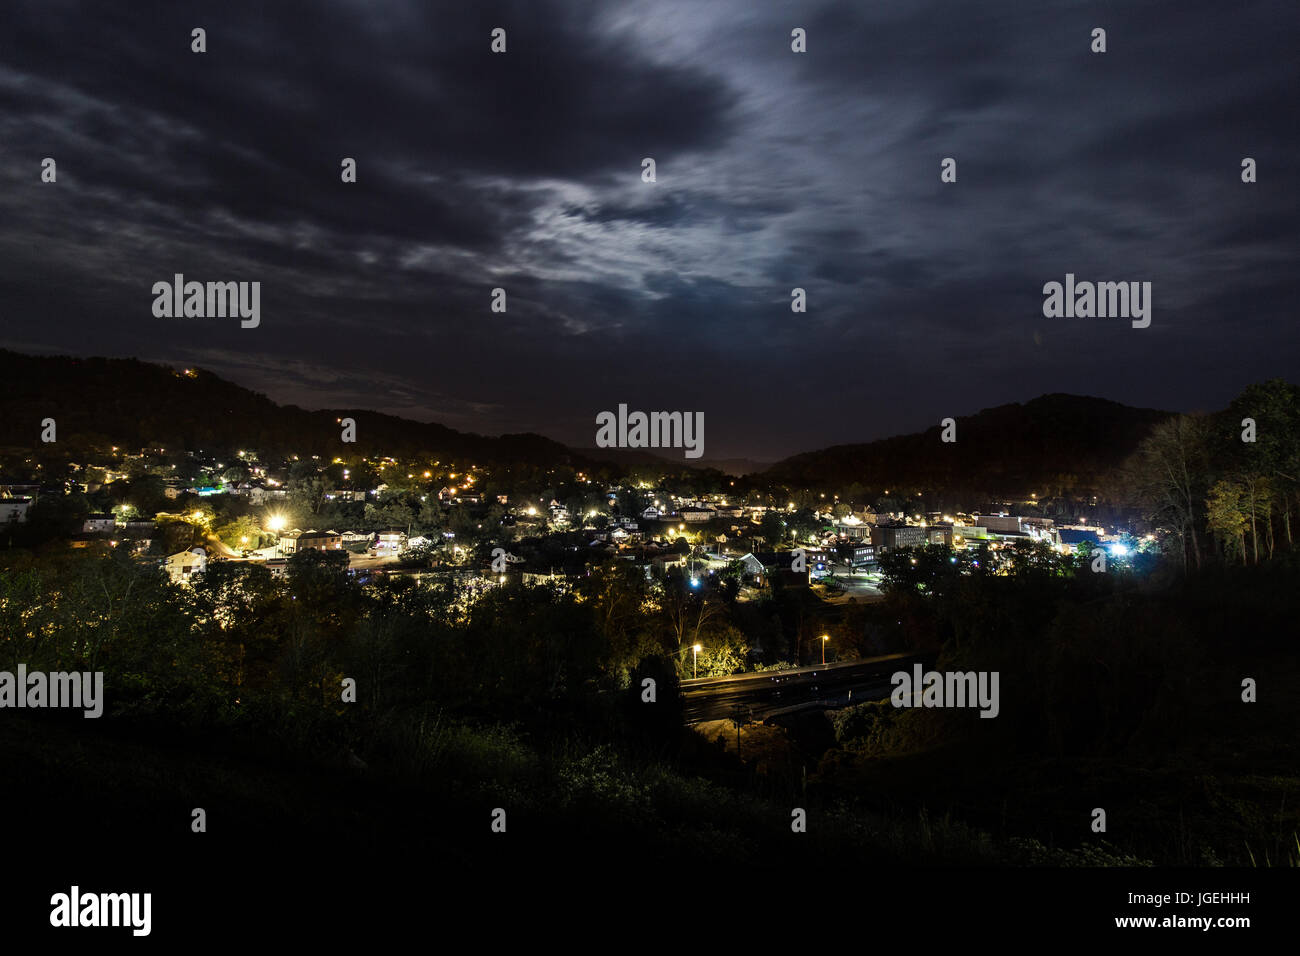 A rural town situated in a valley at night. Stock Photo